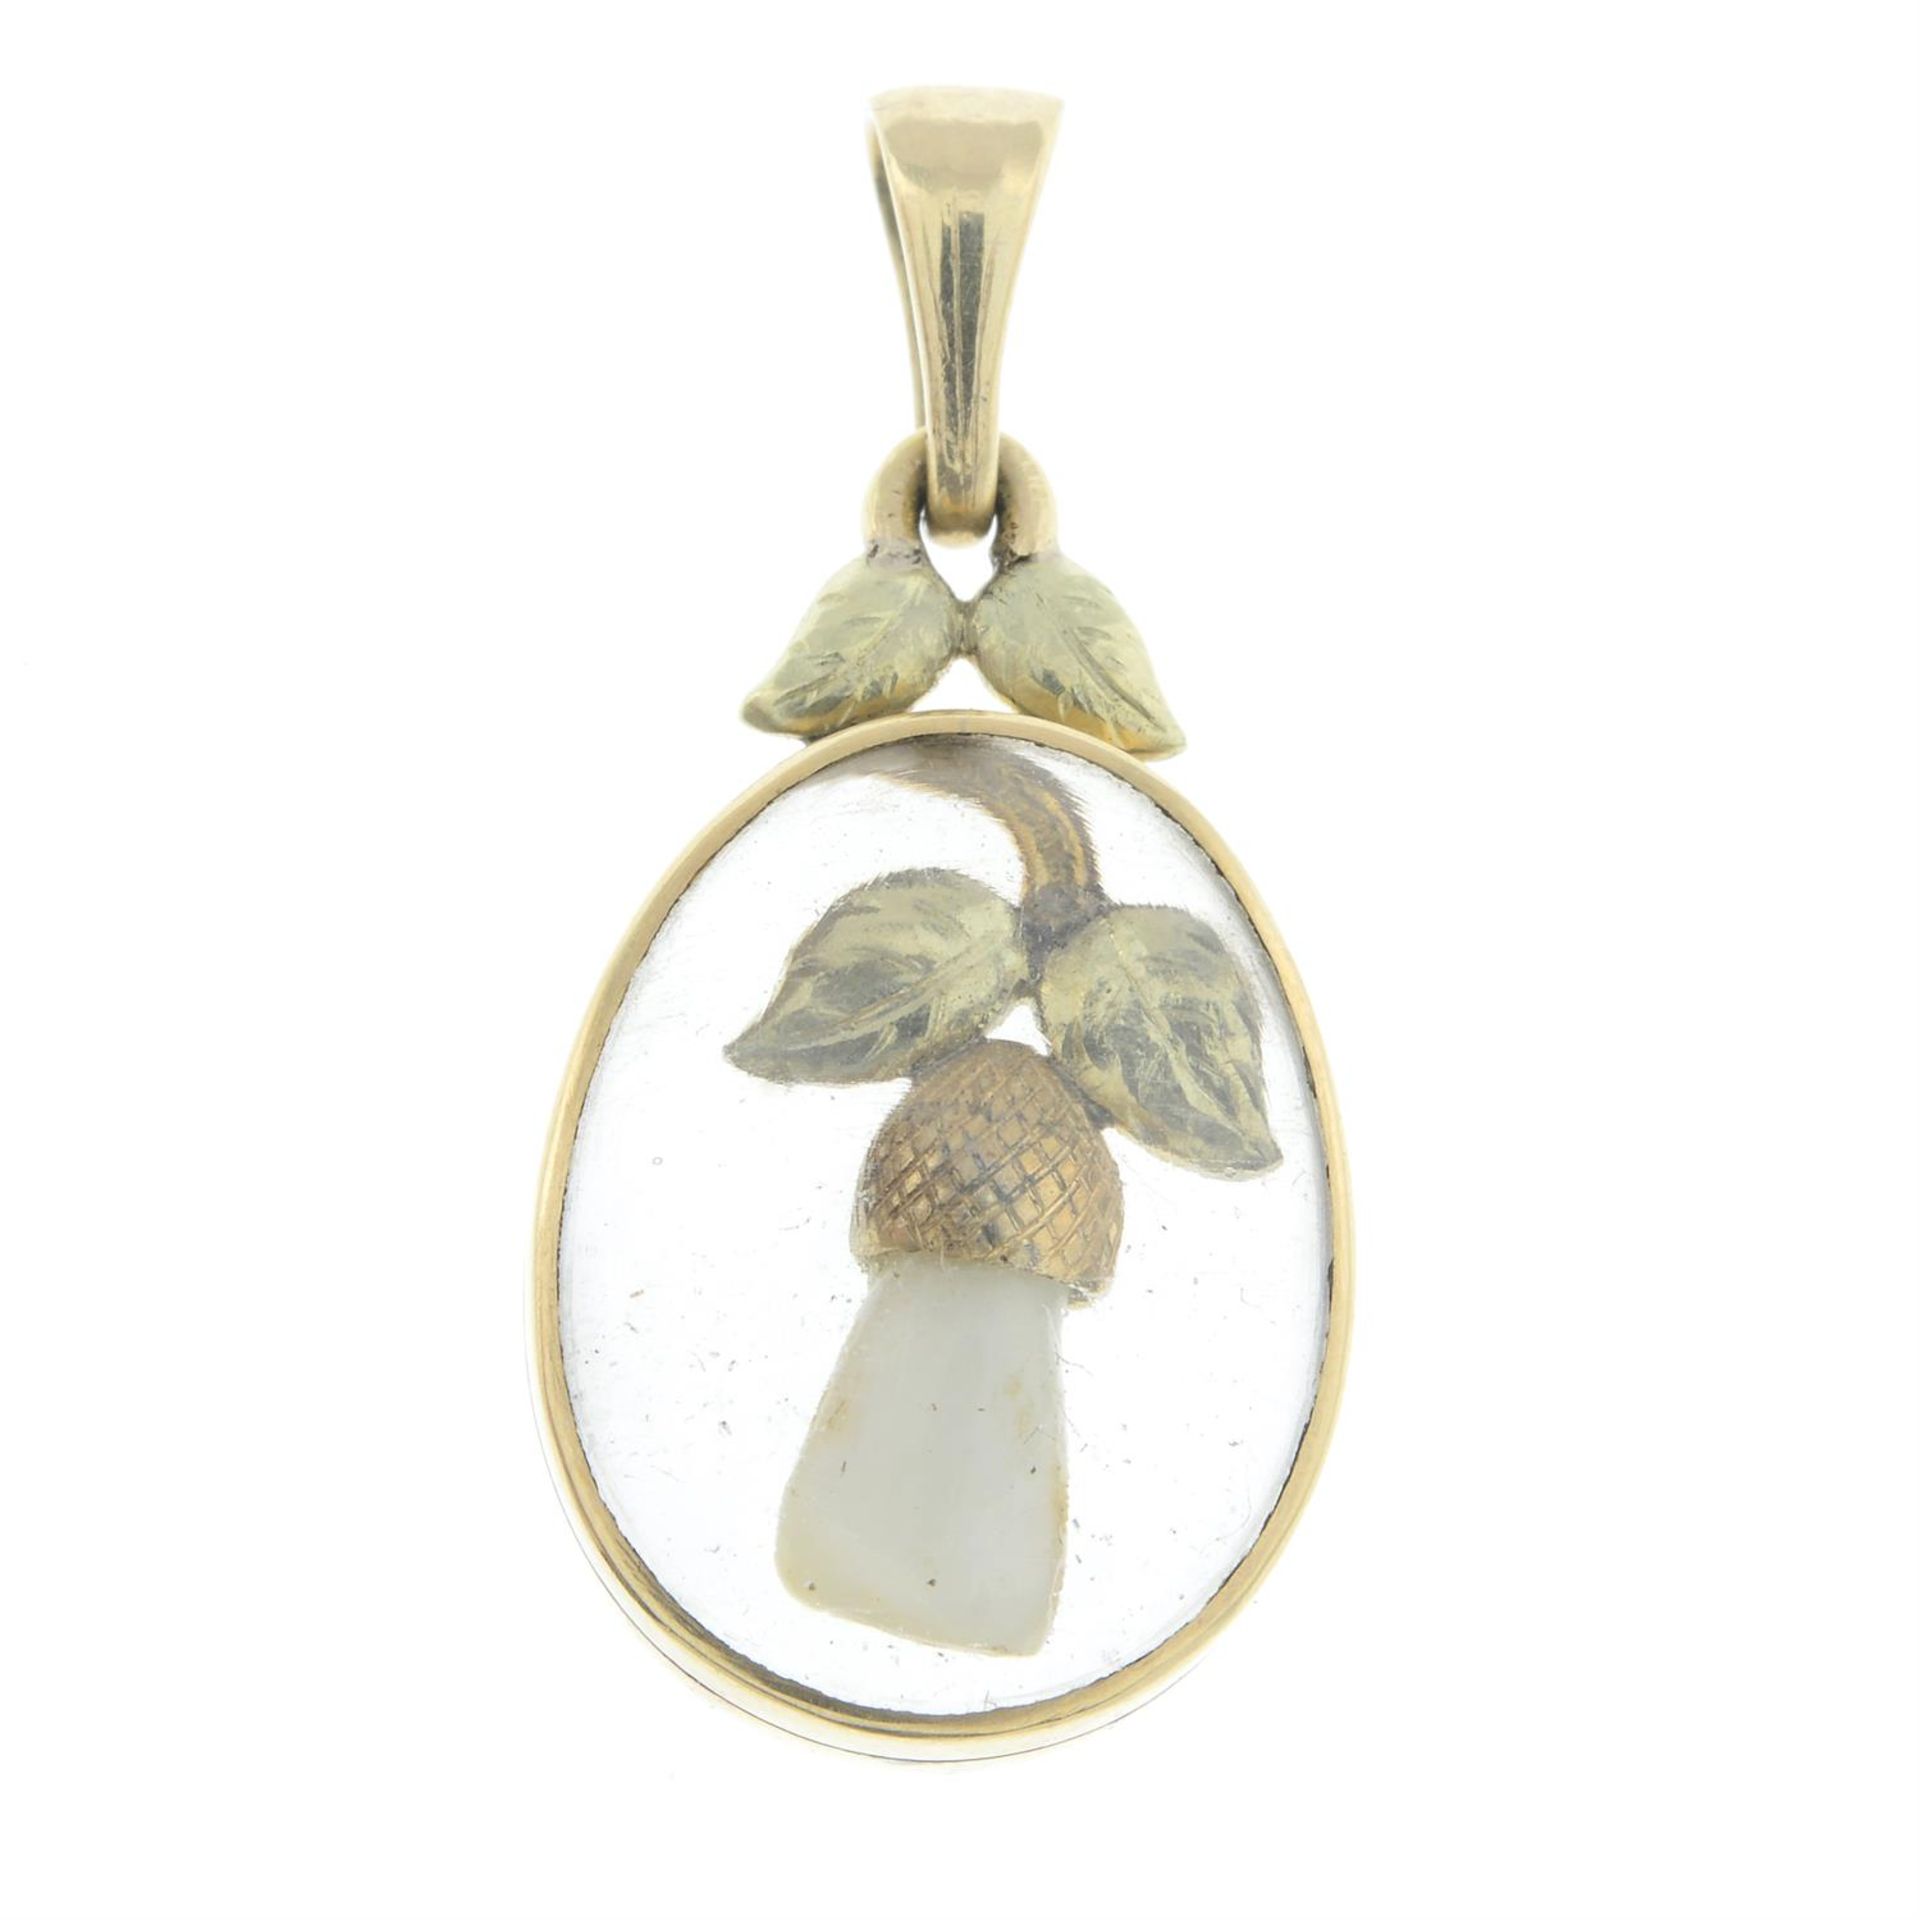 A Victorian tooth pendant.